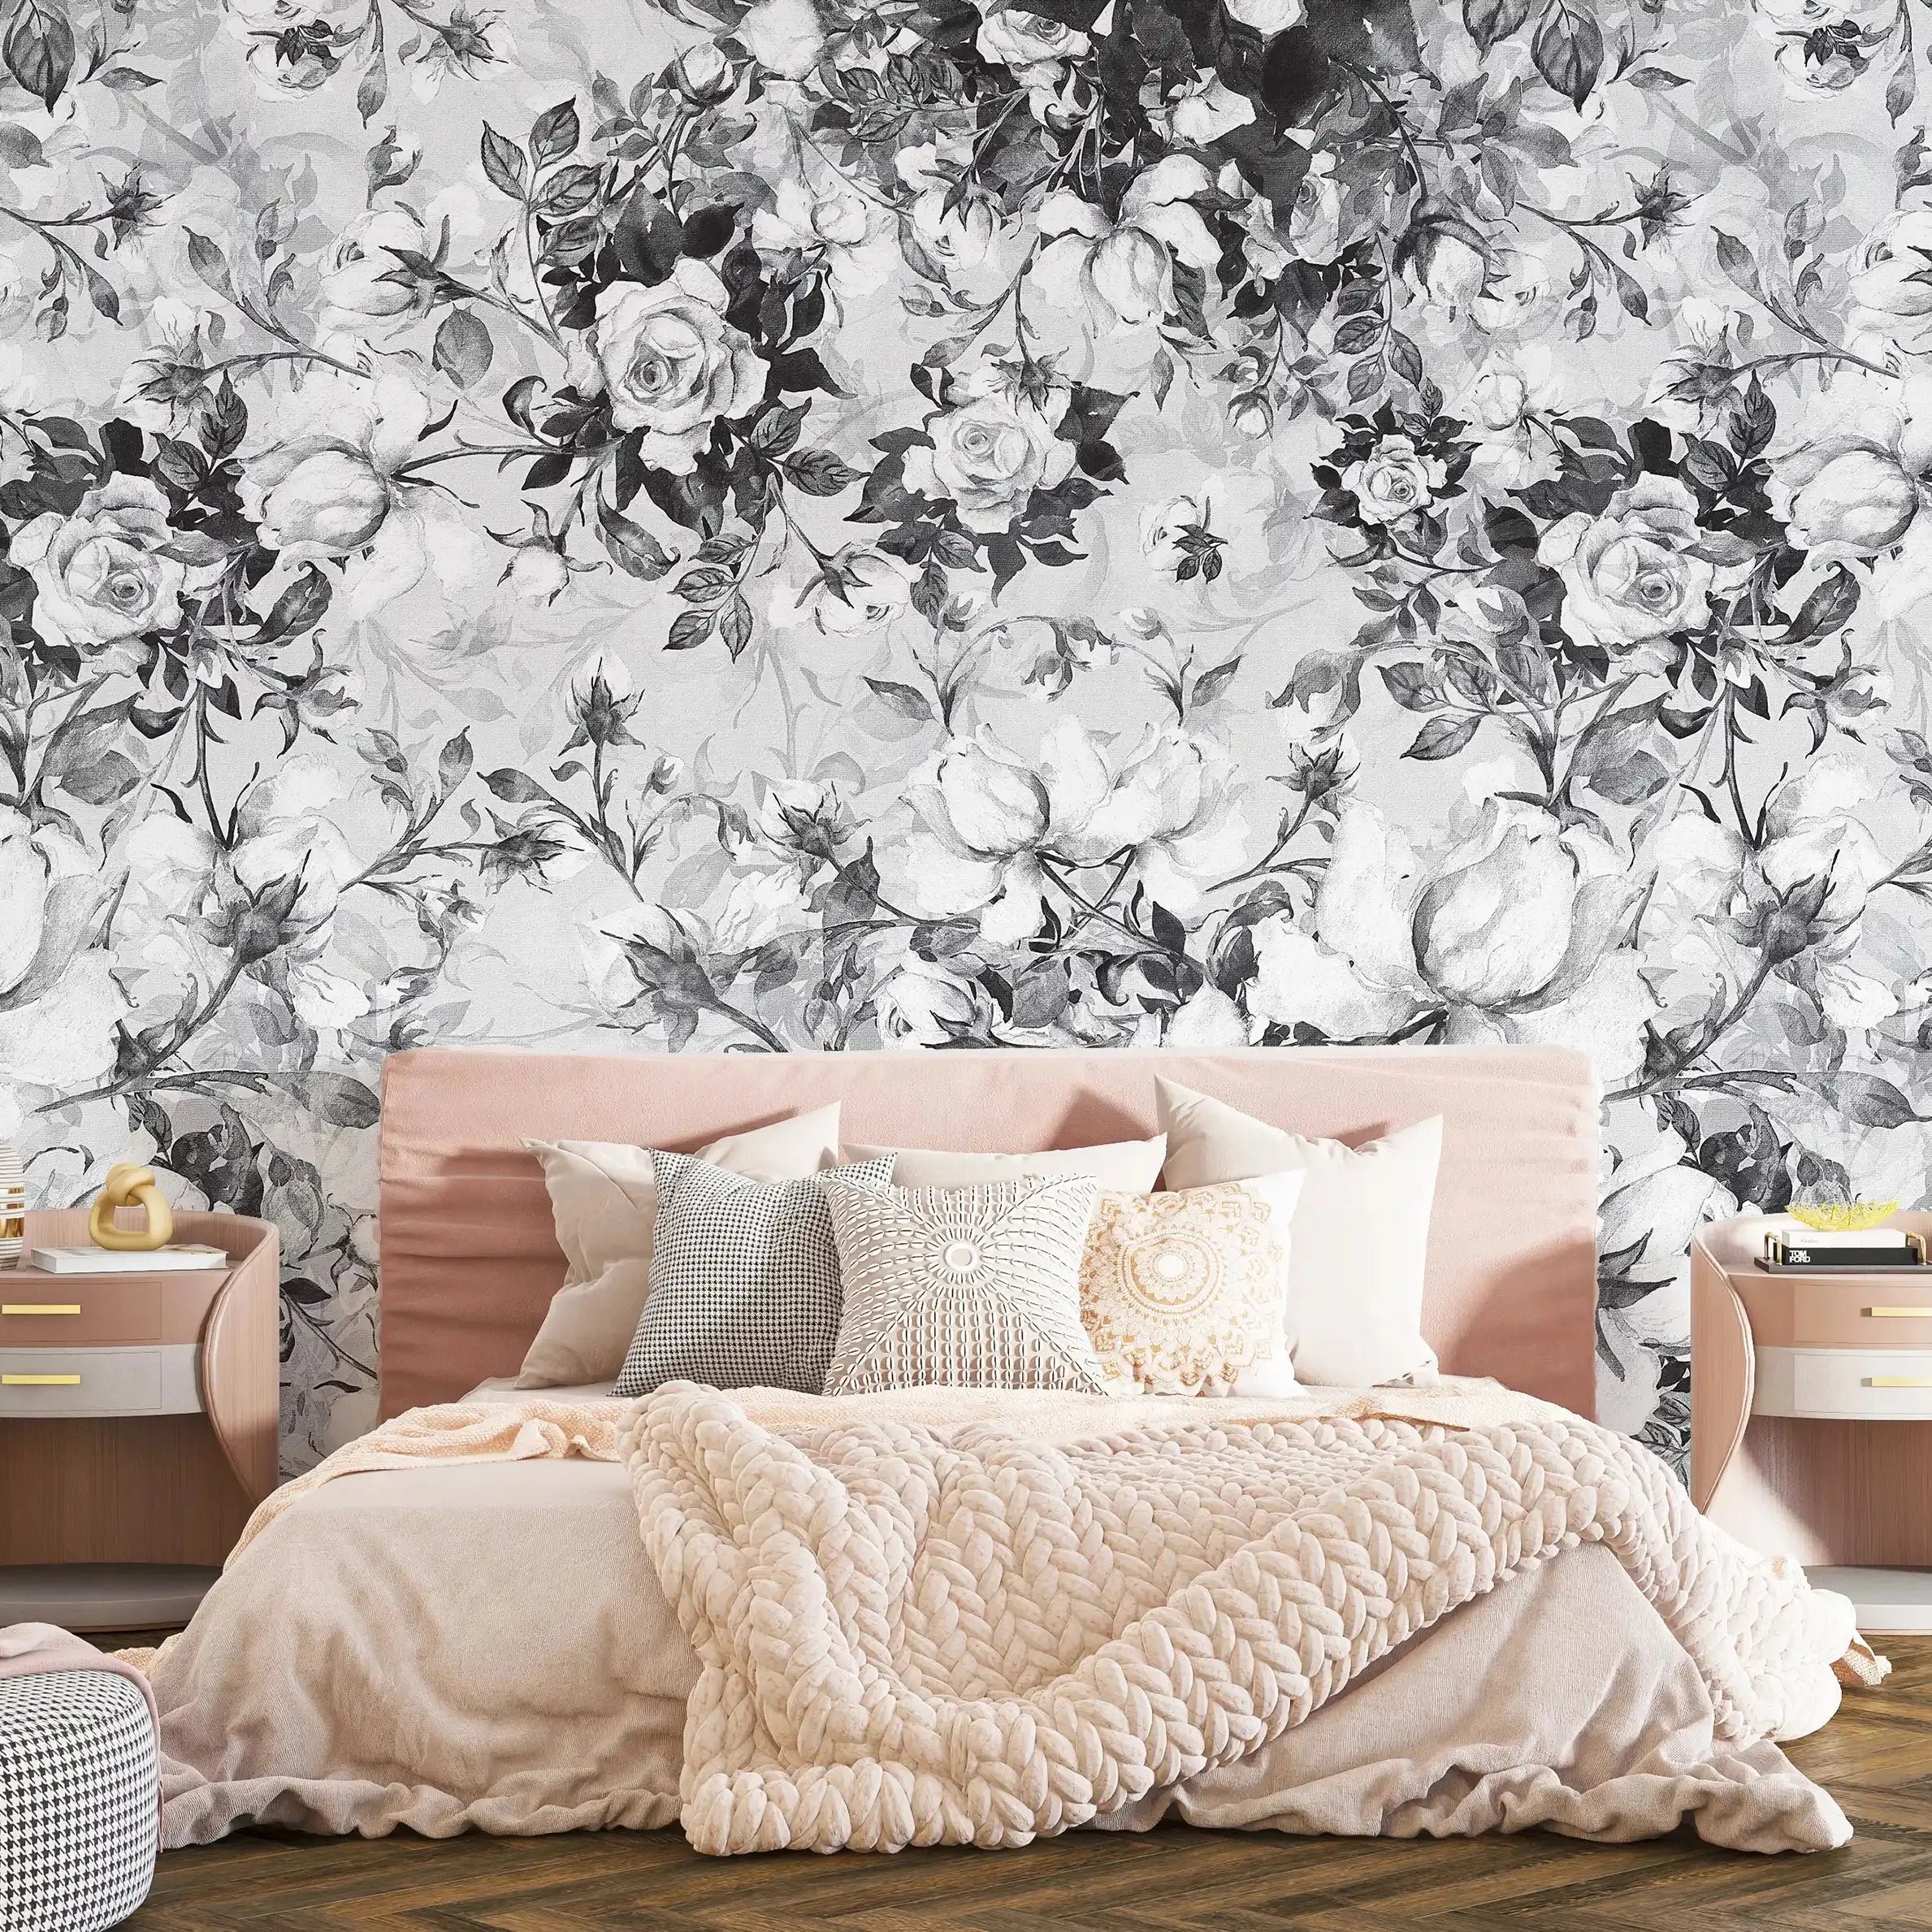 3043-E / Pink Floral Self-Adhesive Wallpaper: Easy Peel and Stick Wall Mural, Modern Room Decor, Bathroom, and Kitchen - Artevella